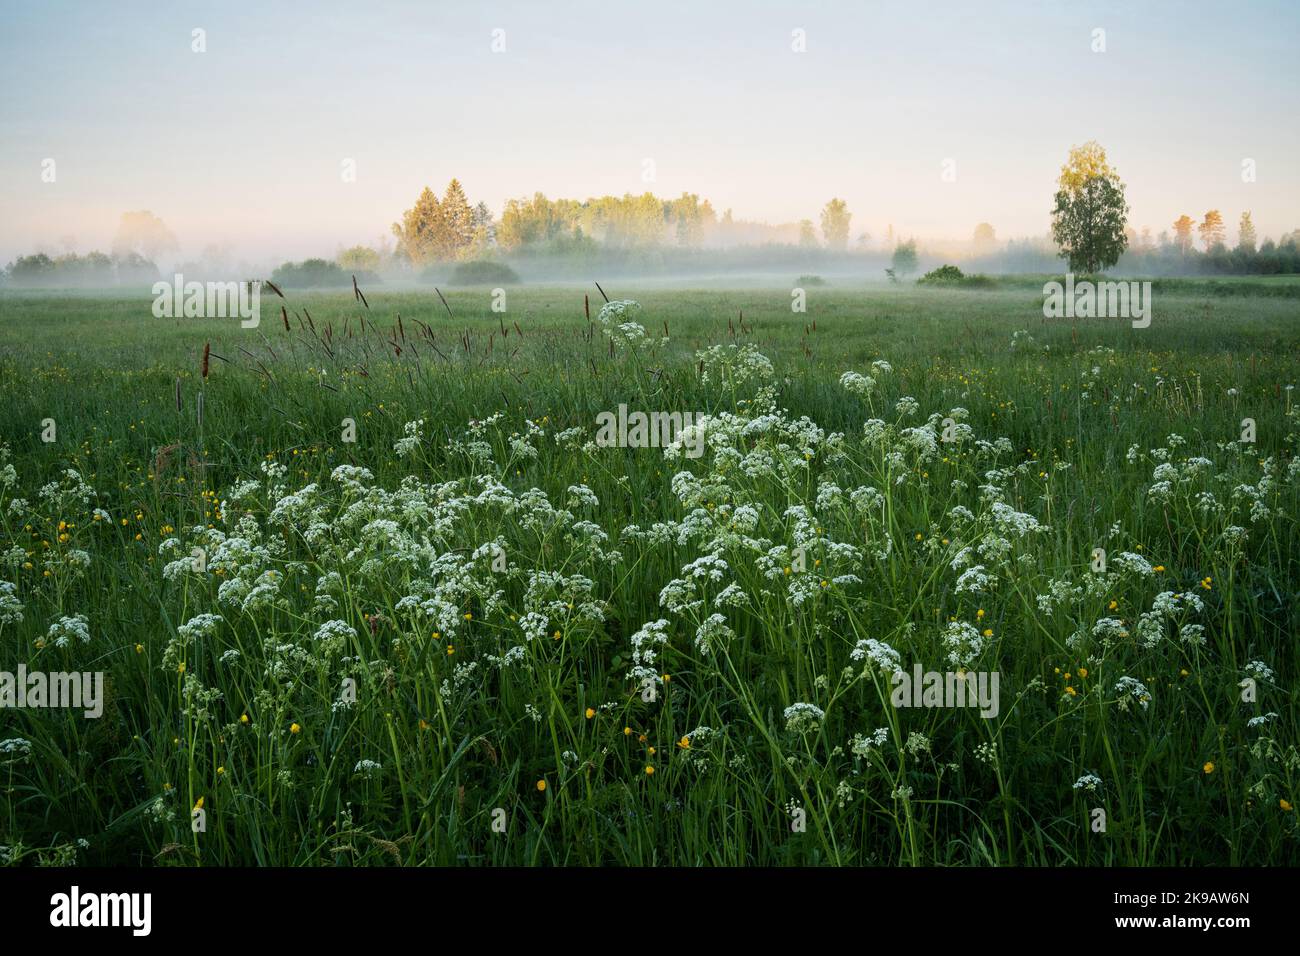 A view to a morning meadow with flowering Cow parsley in the foreground. Shot in Estonia, Northern Europe. Stock Photo